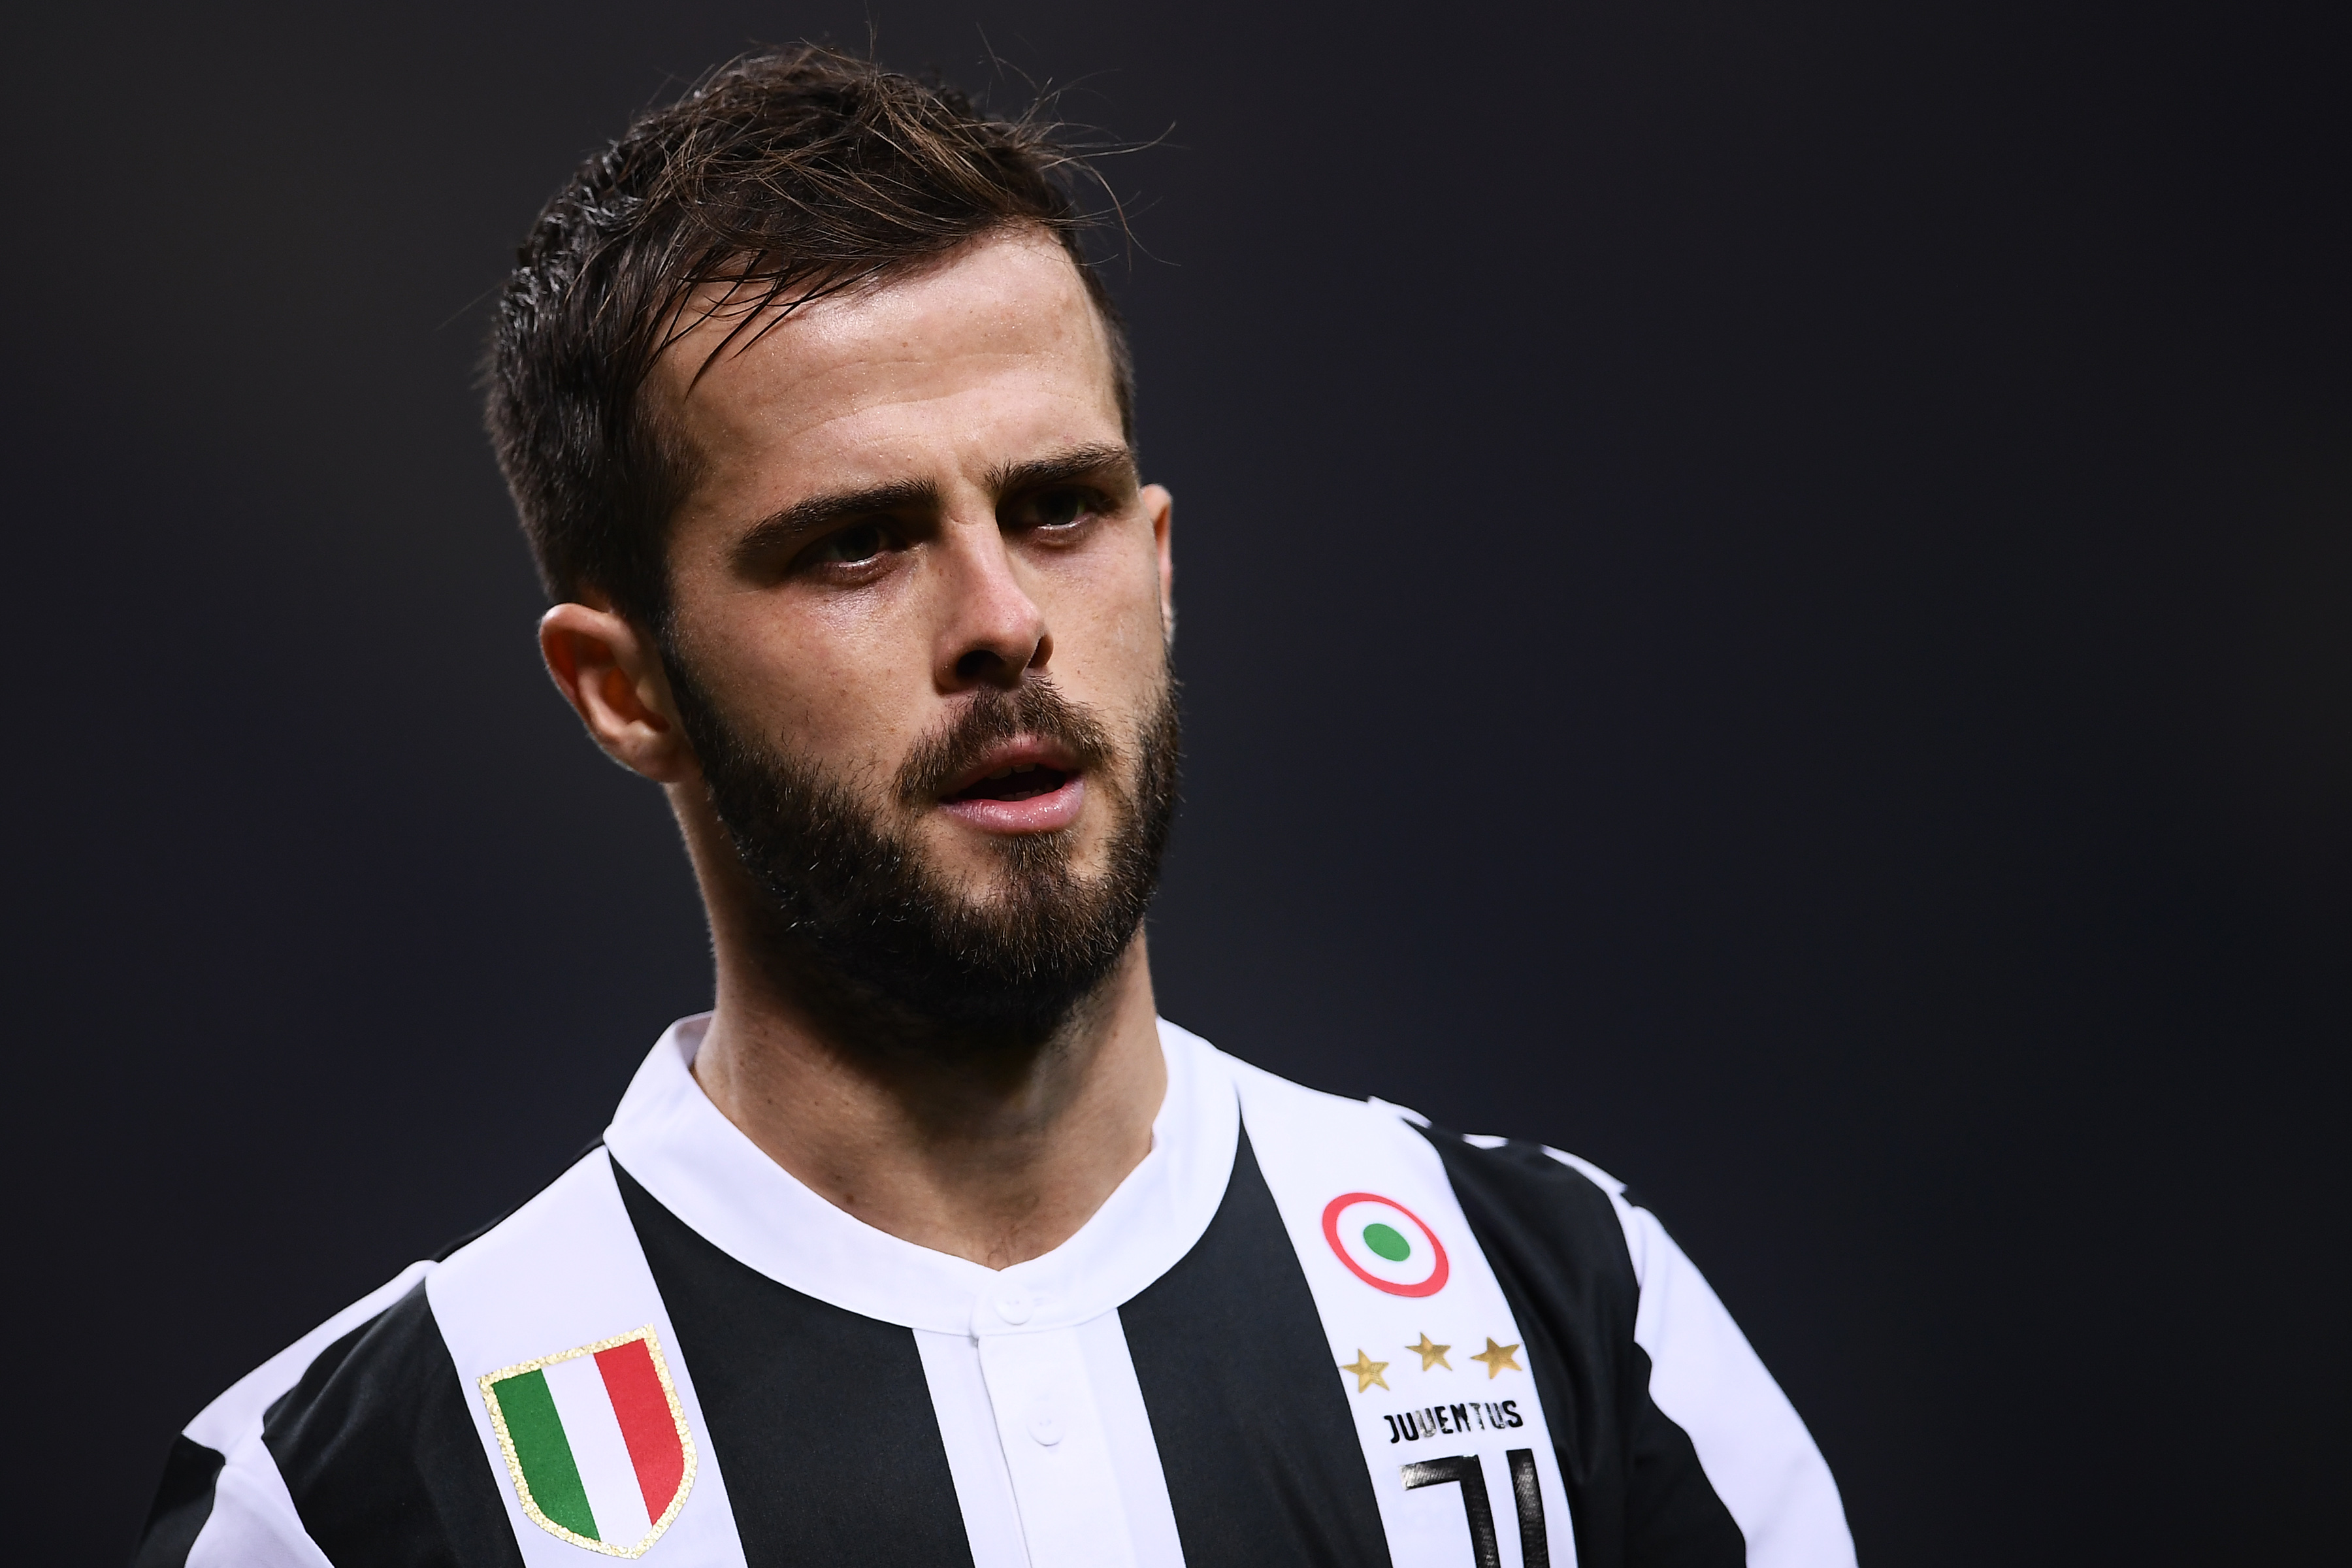 Juventus' midfielder Miralem Pjanic of Bosnia-Erzegovina looks on during the Italian Serie A football match AC Milan Vs Juventus on October 28, 2017 at the 'Giuseppe Meazza' Stadium in Milan.  / AFP PHOTO / MARCO BERTORELLO        (Photo credit should read MARCO BERTORELLO/AFP/Getty Images)